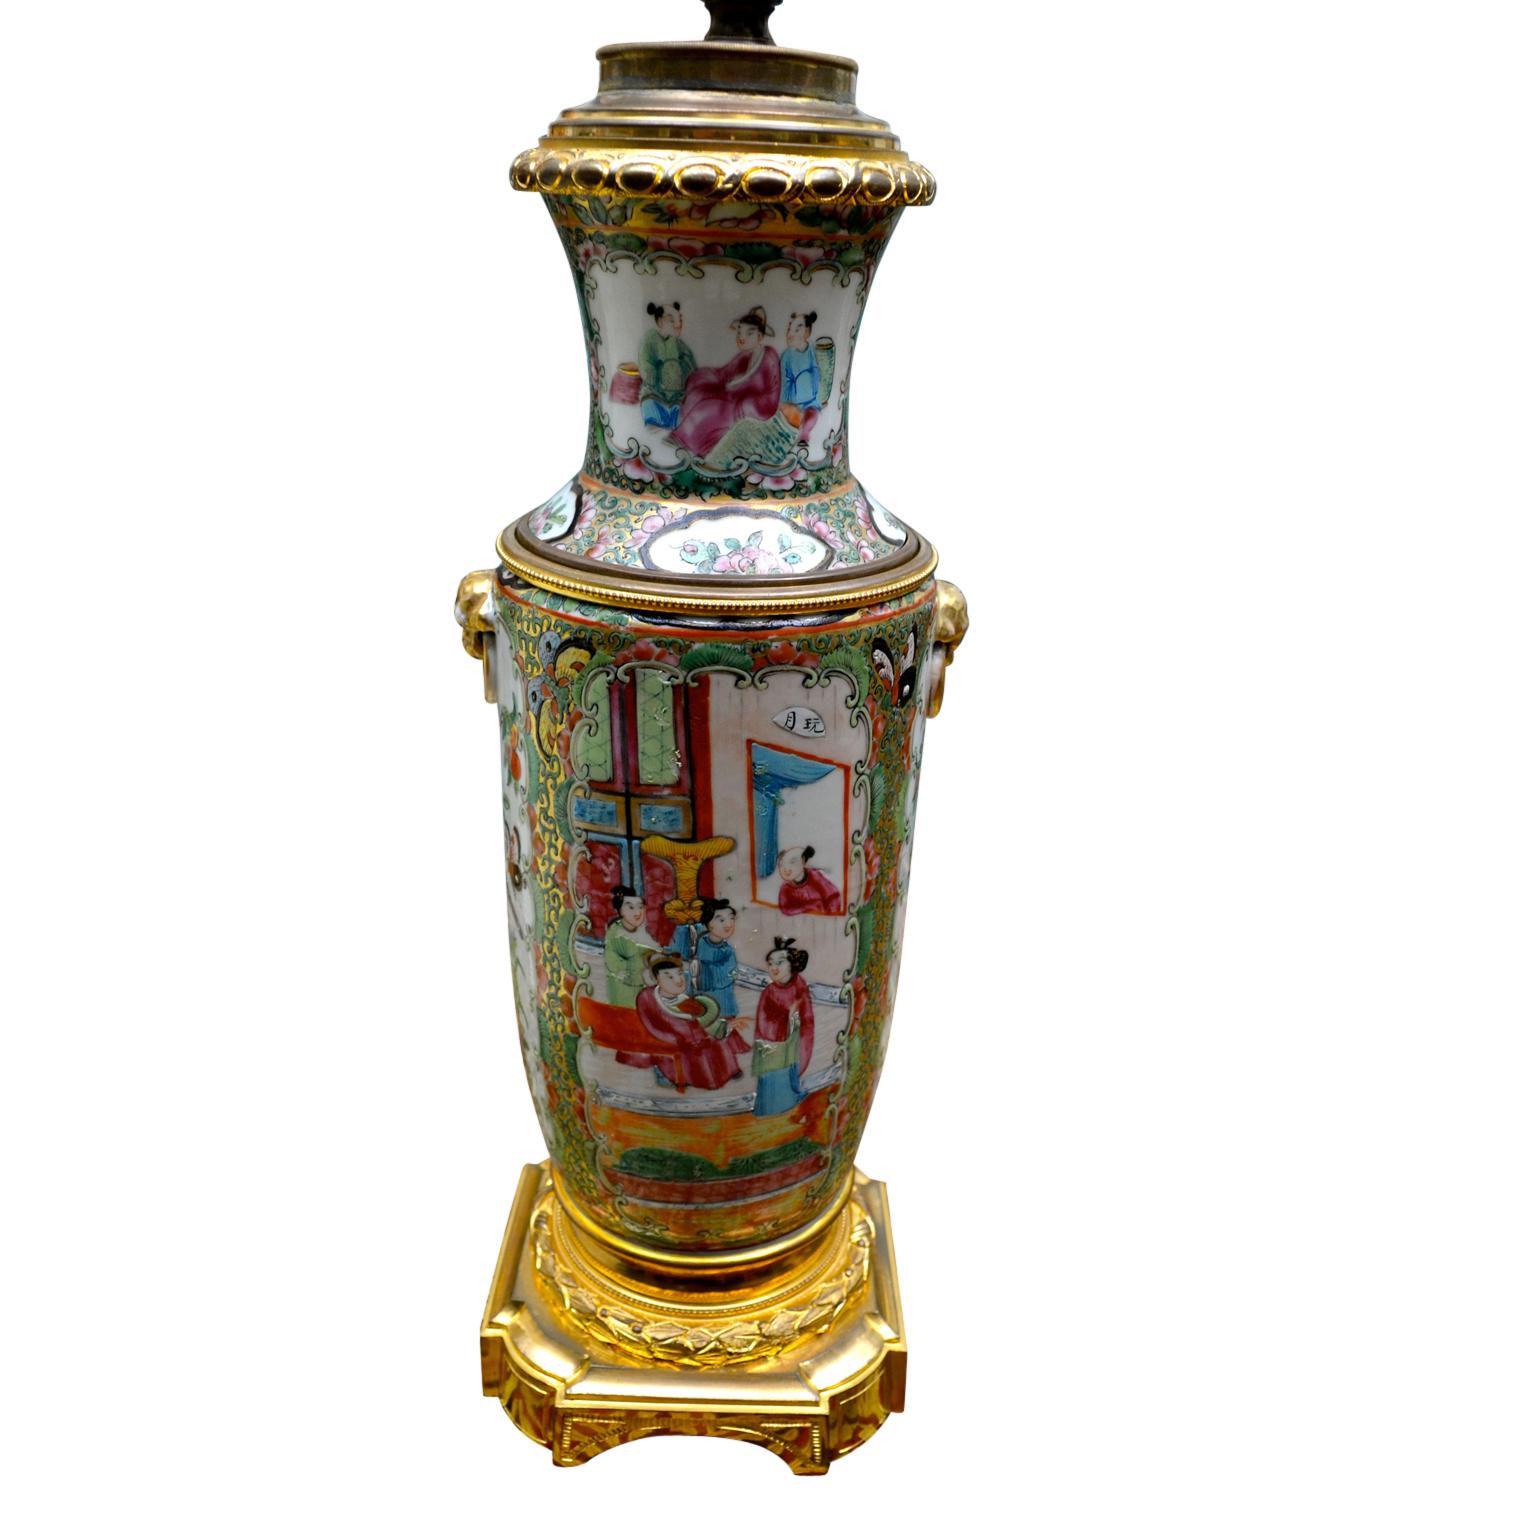 A fine quality, mid-19th century, Chinese Cantonese export, Famille Rose, Rouleau shaped antique table lamp, the term Rouleau was given by the French in the 18th century, the Chinese name for this shape is bang chui ping. The porcelain produced at